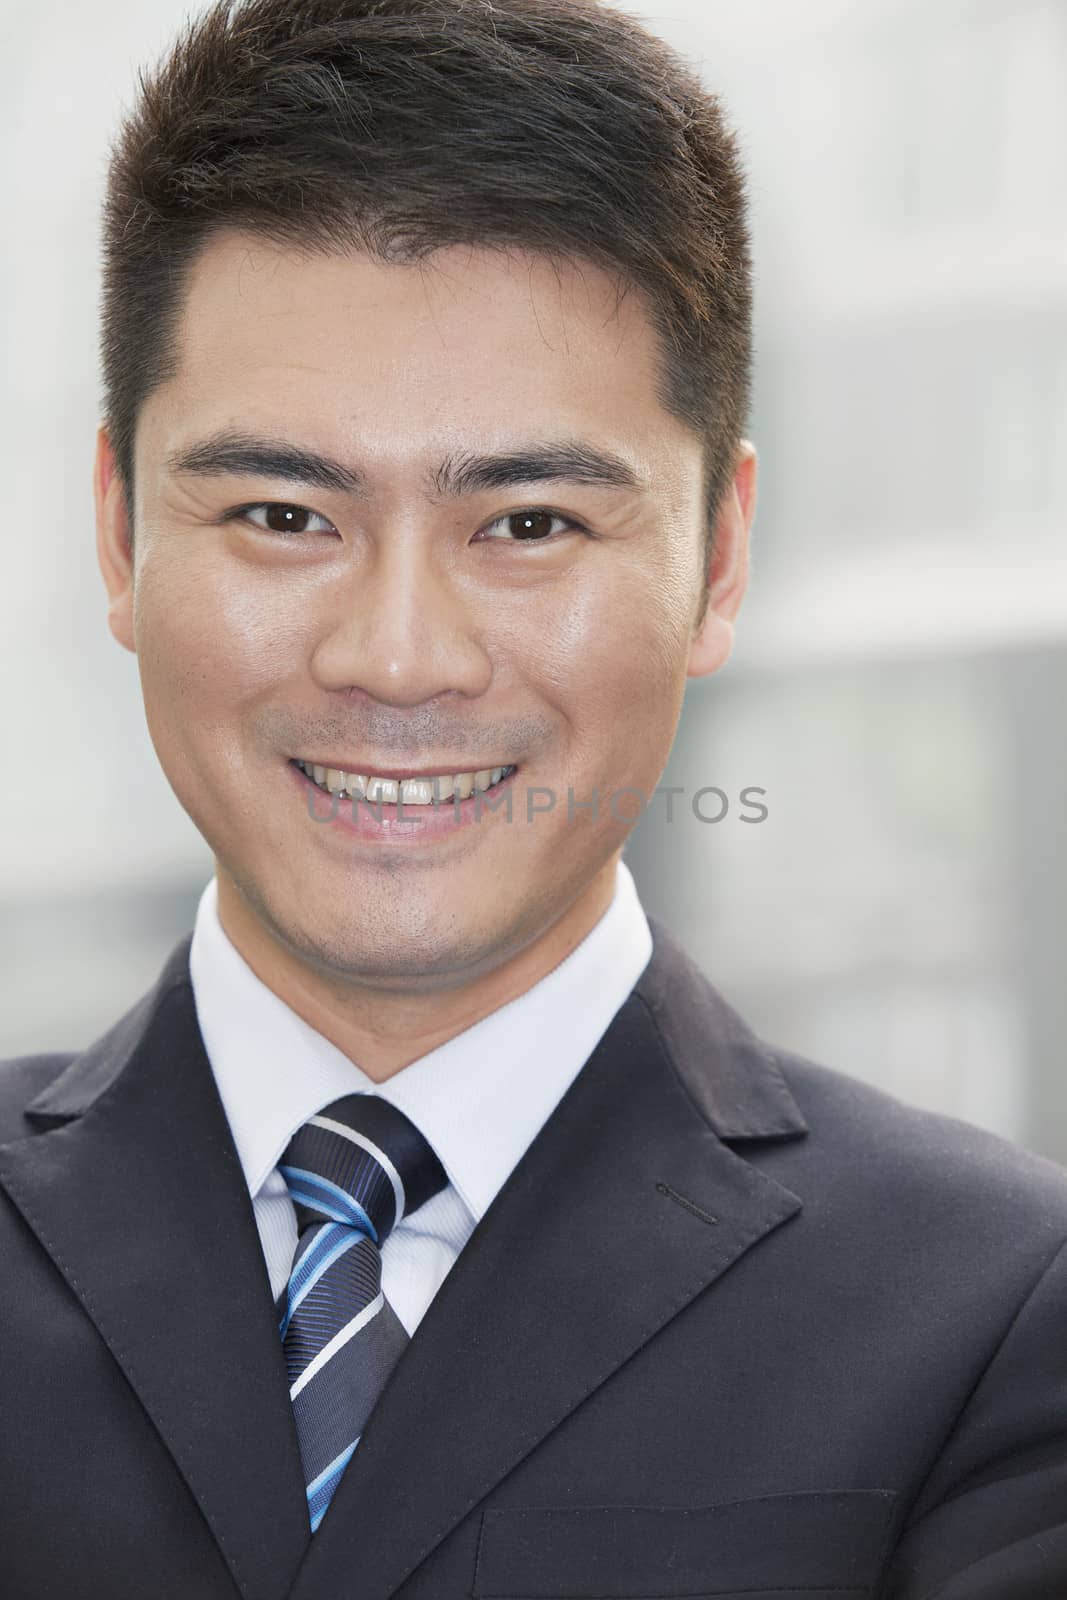 Young Businessman Smiling and Looking into Camera, Portrait by XiXinXing